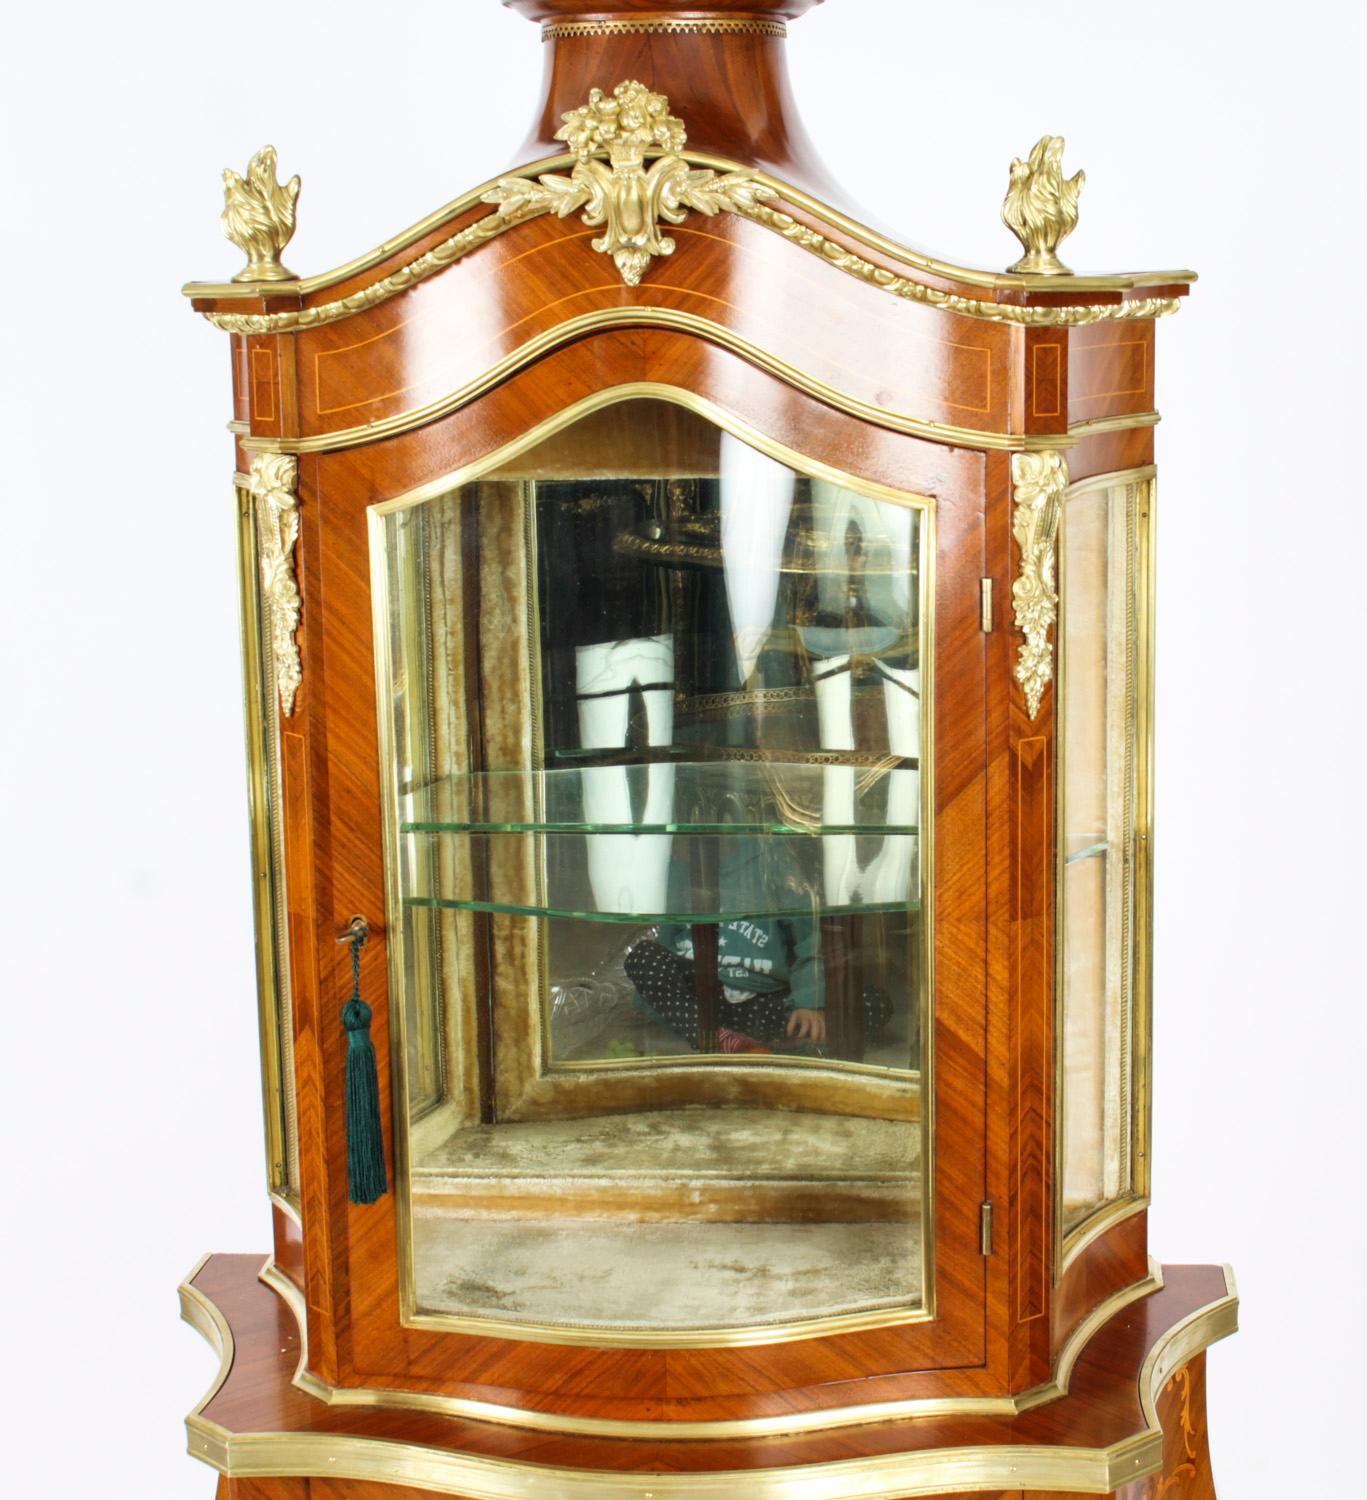 This is a beautiful antique French Louis Revival wood, marquetry and ormolu mounted display cabinet, circa 1870 in date.

This beautiful cabinet has an abundance of exquisite ormolu mounts as well as intricate inlaid floral and foliate marquetry